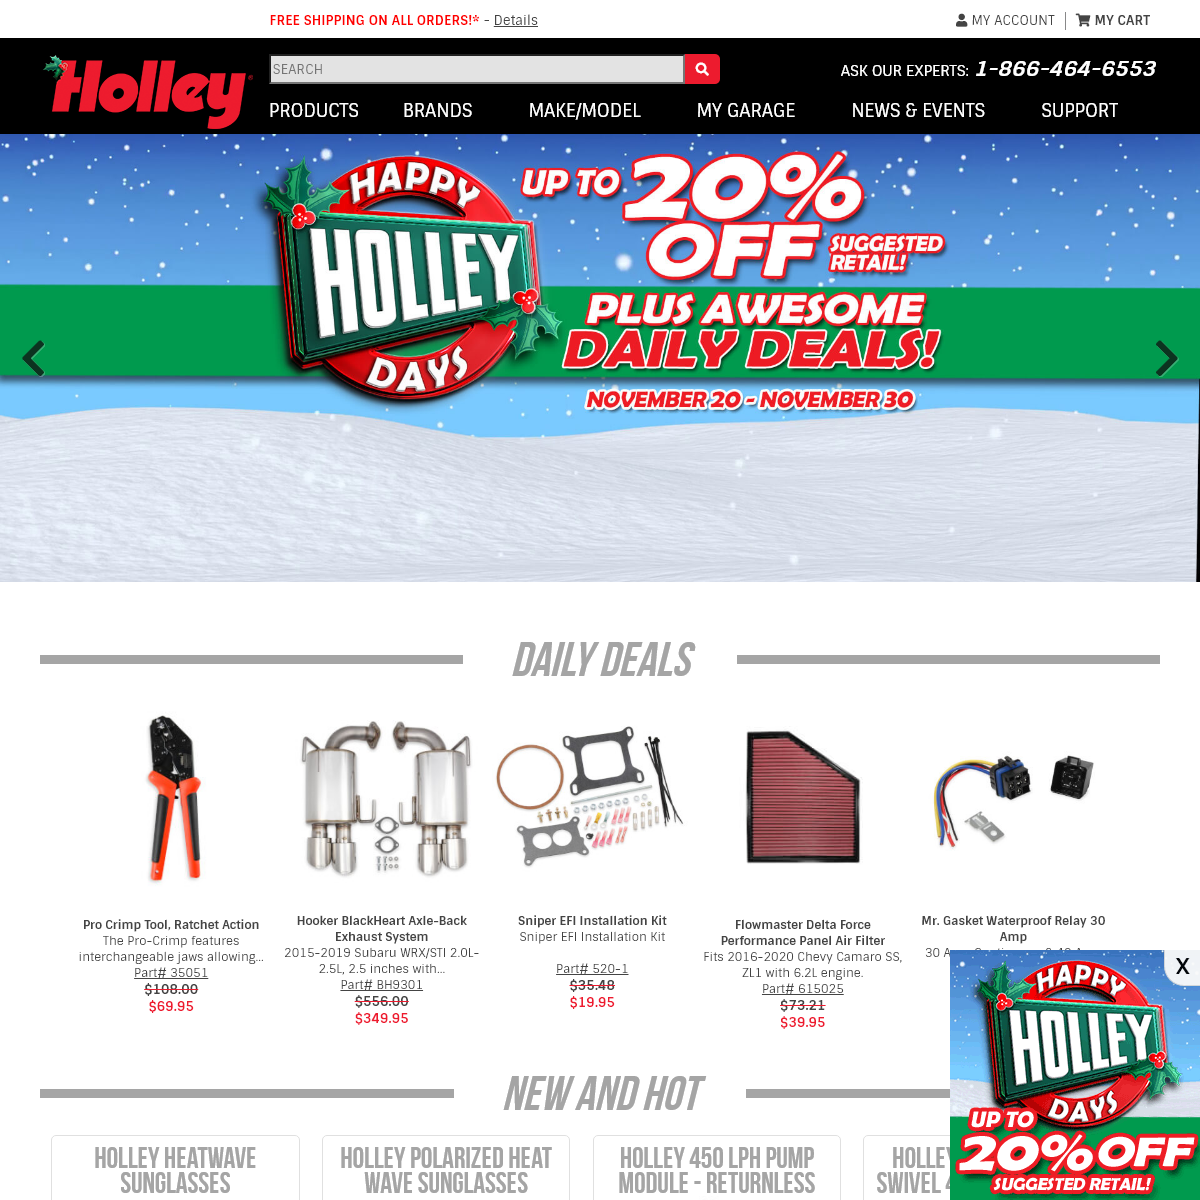 A complete backup of holley.com